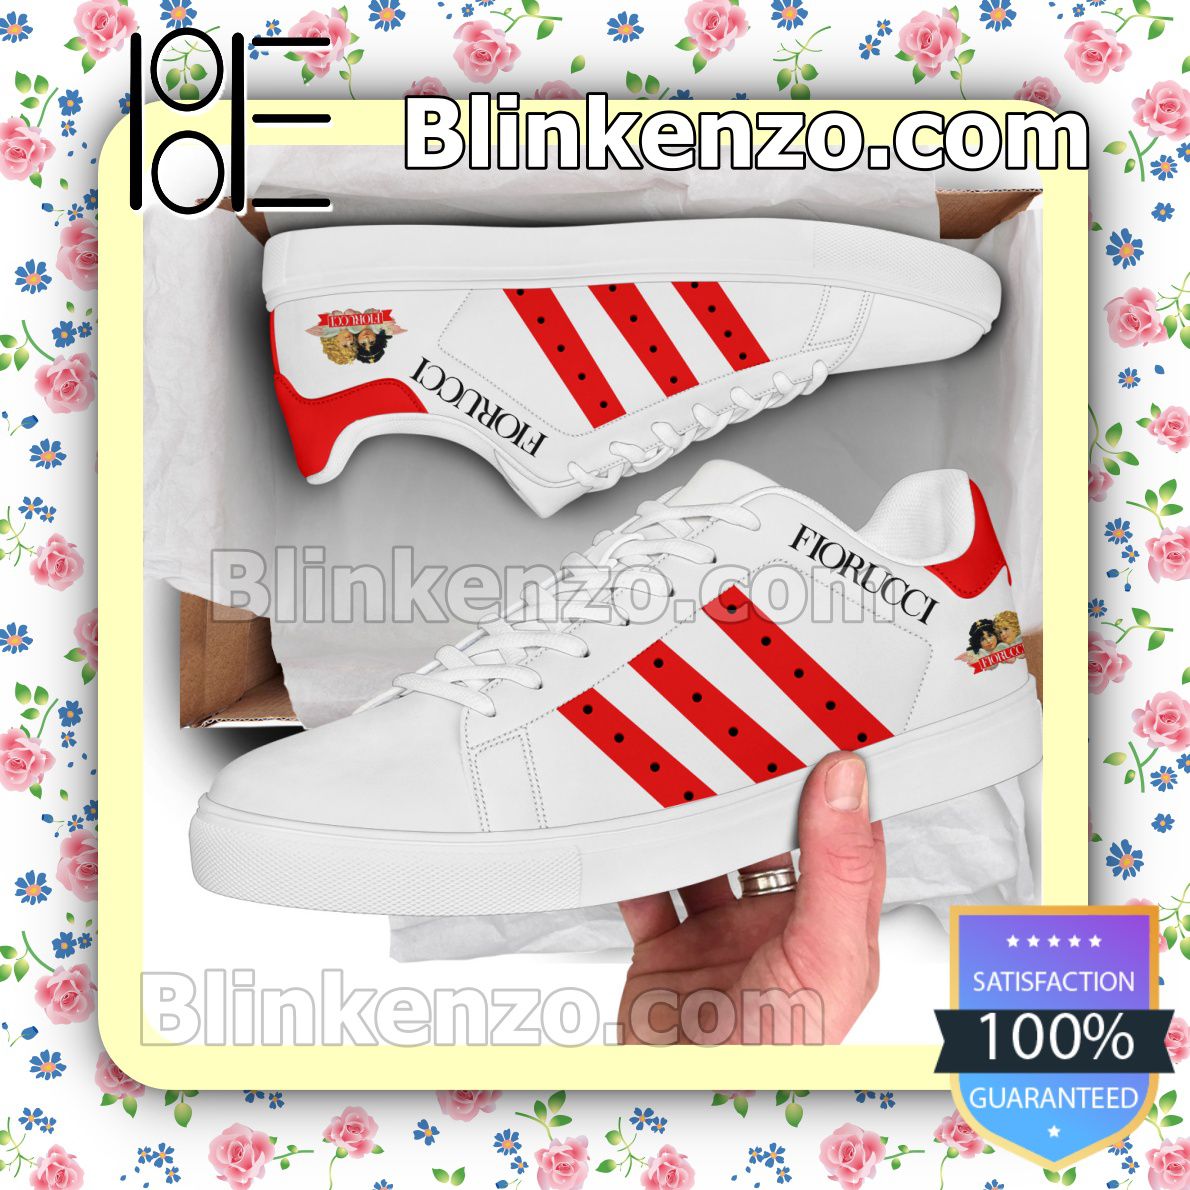 Fiorucci Company Brand Adidas Low Top Shoes